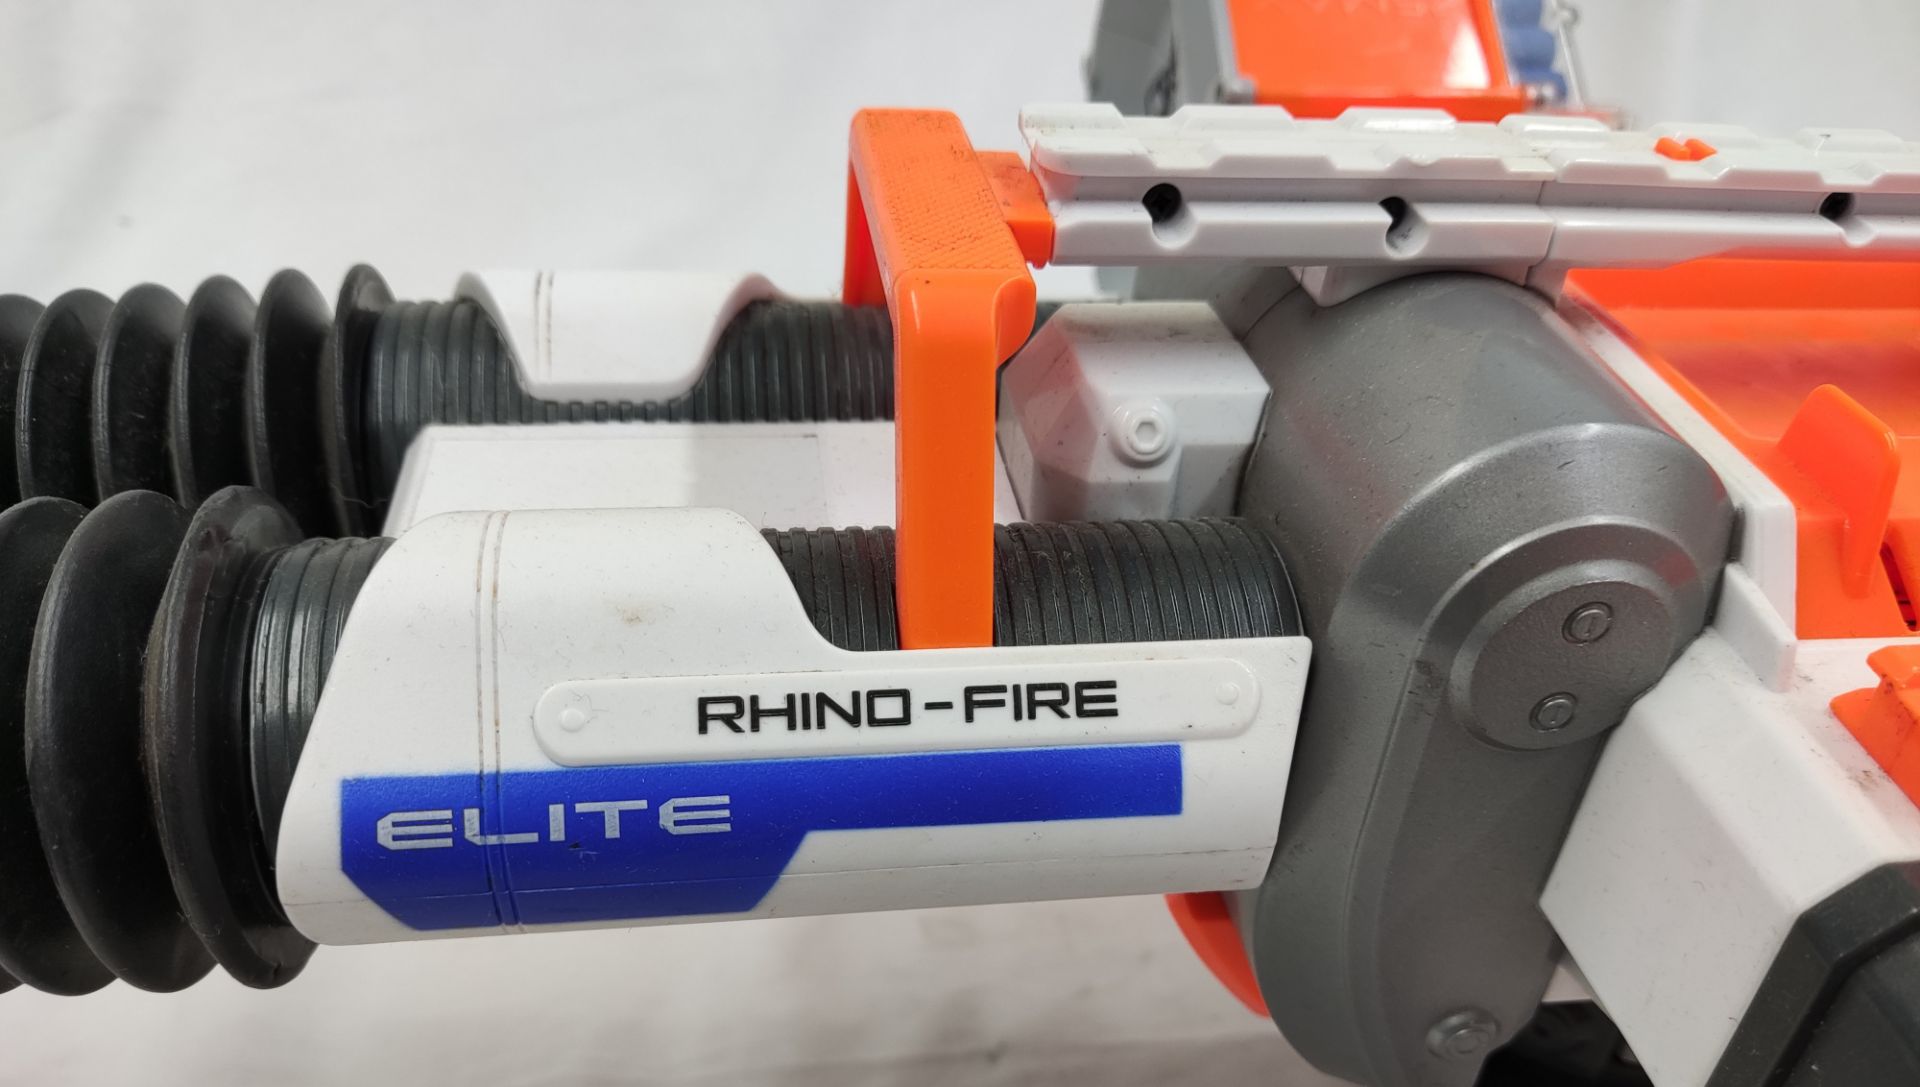 1 x Nerf Rhino-Fire Electric Nerf Gun with Moving Barrels - Used - CL444 - NO VAT ON THE HAMMER - - Image 12 of 12